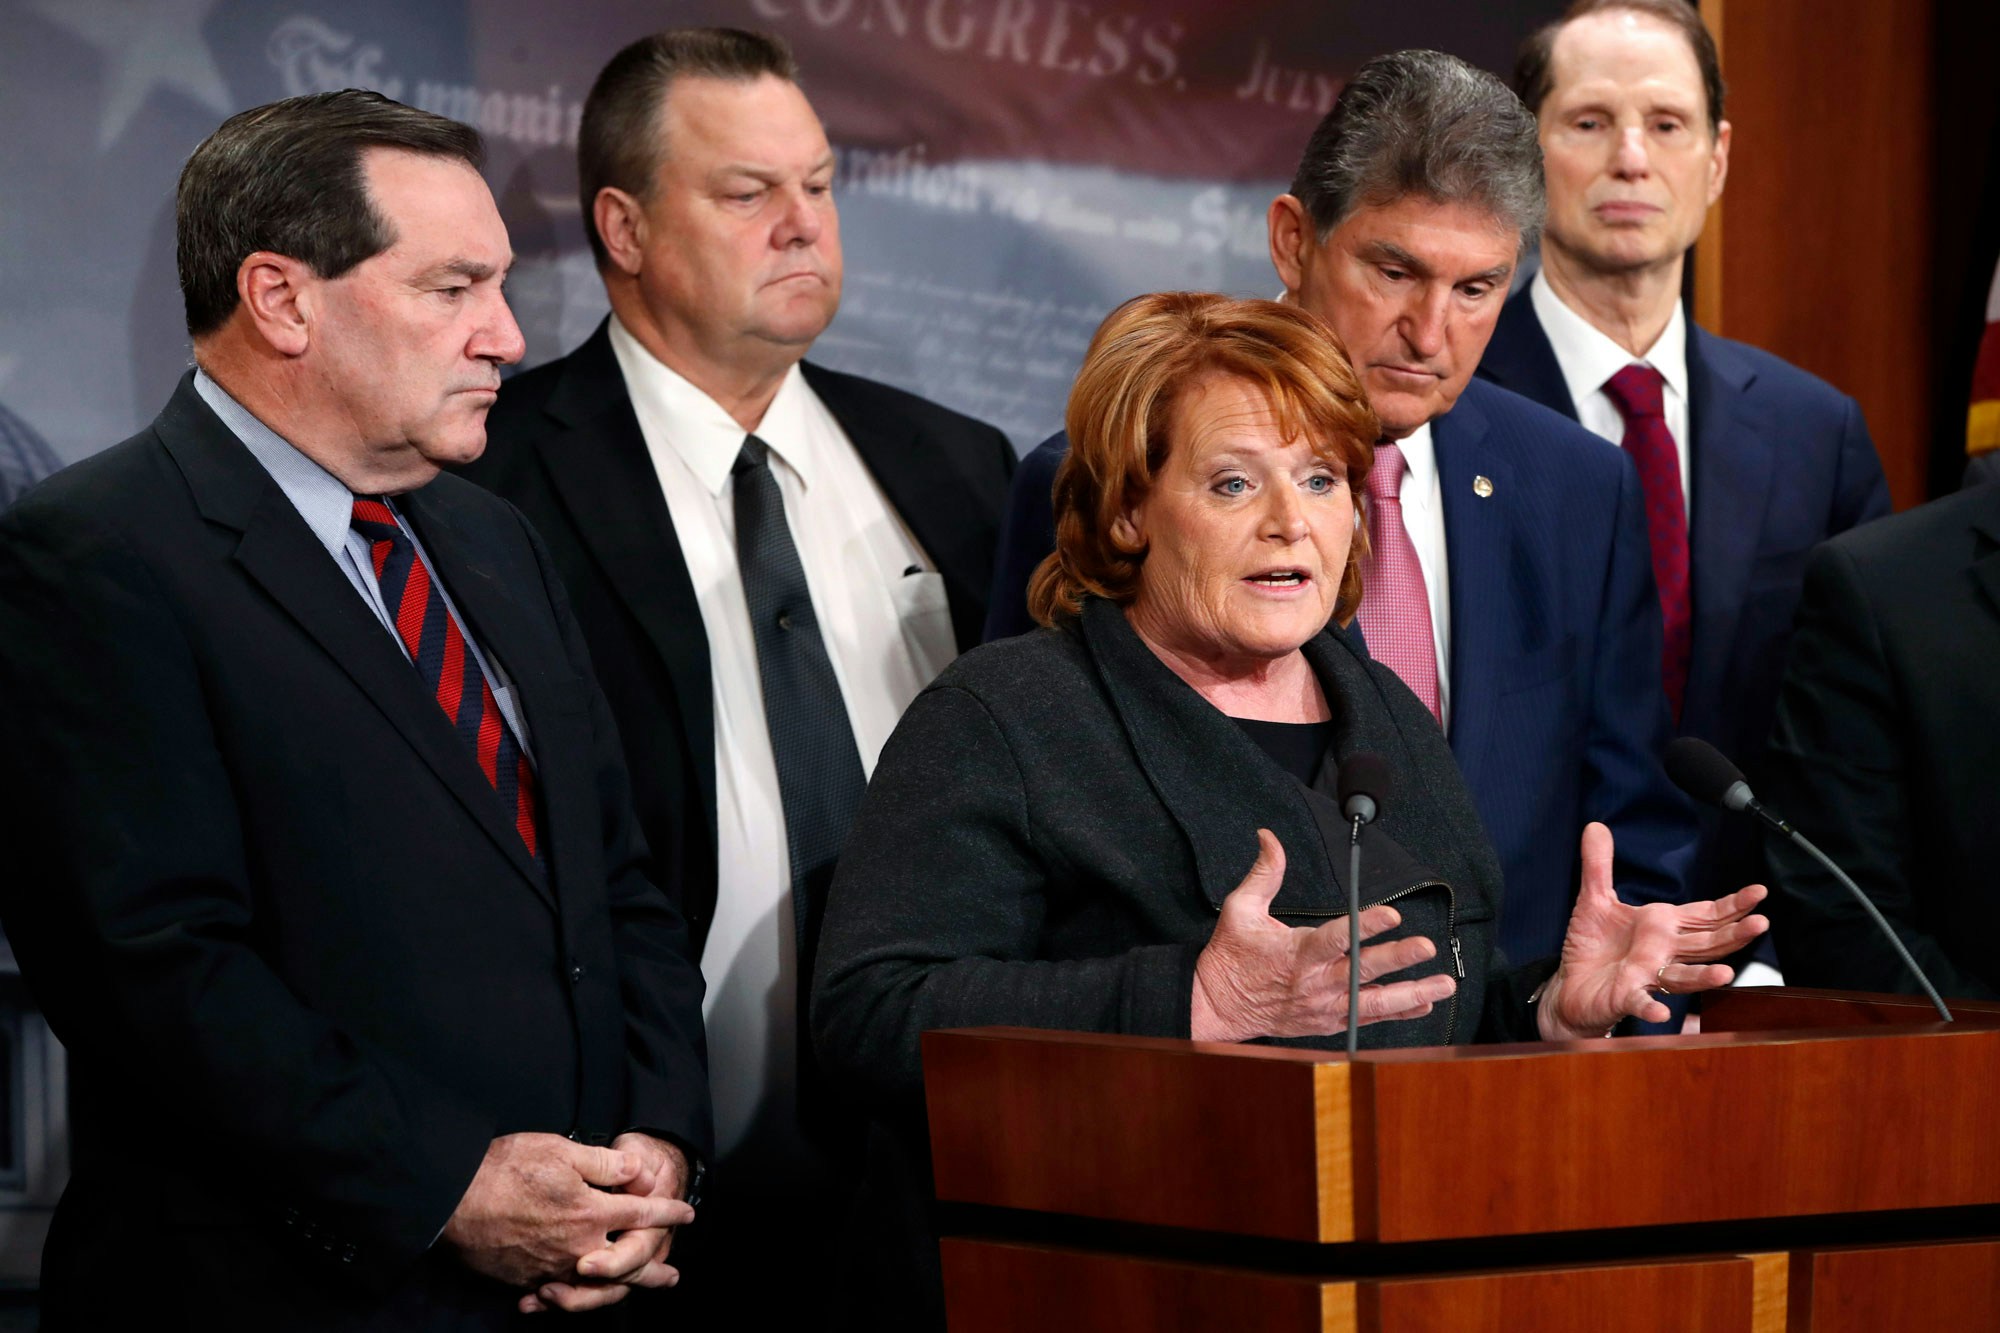 Sen. Heidi Heitkamp, D-N.D., speaks, as she is accompanied by Sen. Joe Donnelly, D-Ind., left, Sen. Jon Tester, D-Mont., Sen. Joe Manchin, D-W.Va., and Sen. Ron Wyden, D-Ore., during a news conference about their hopes for a bipartisan approach to tax reform, Tuesday, Nov. 28, 2017, on Capitol Hill in Washington. (AP Photo/Jacquelyn Martin)